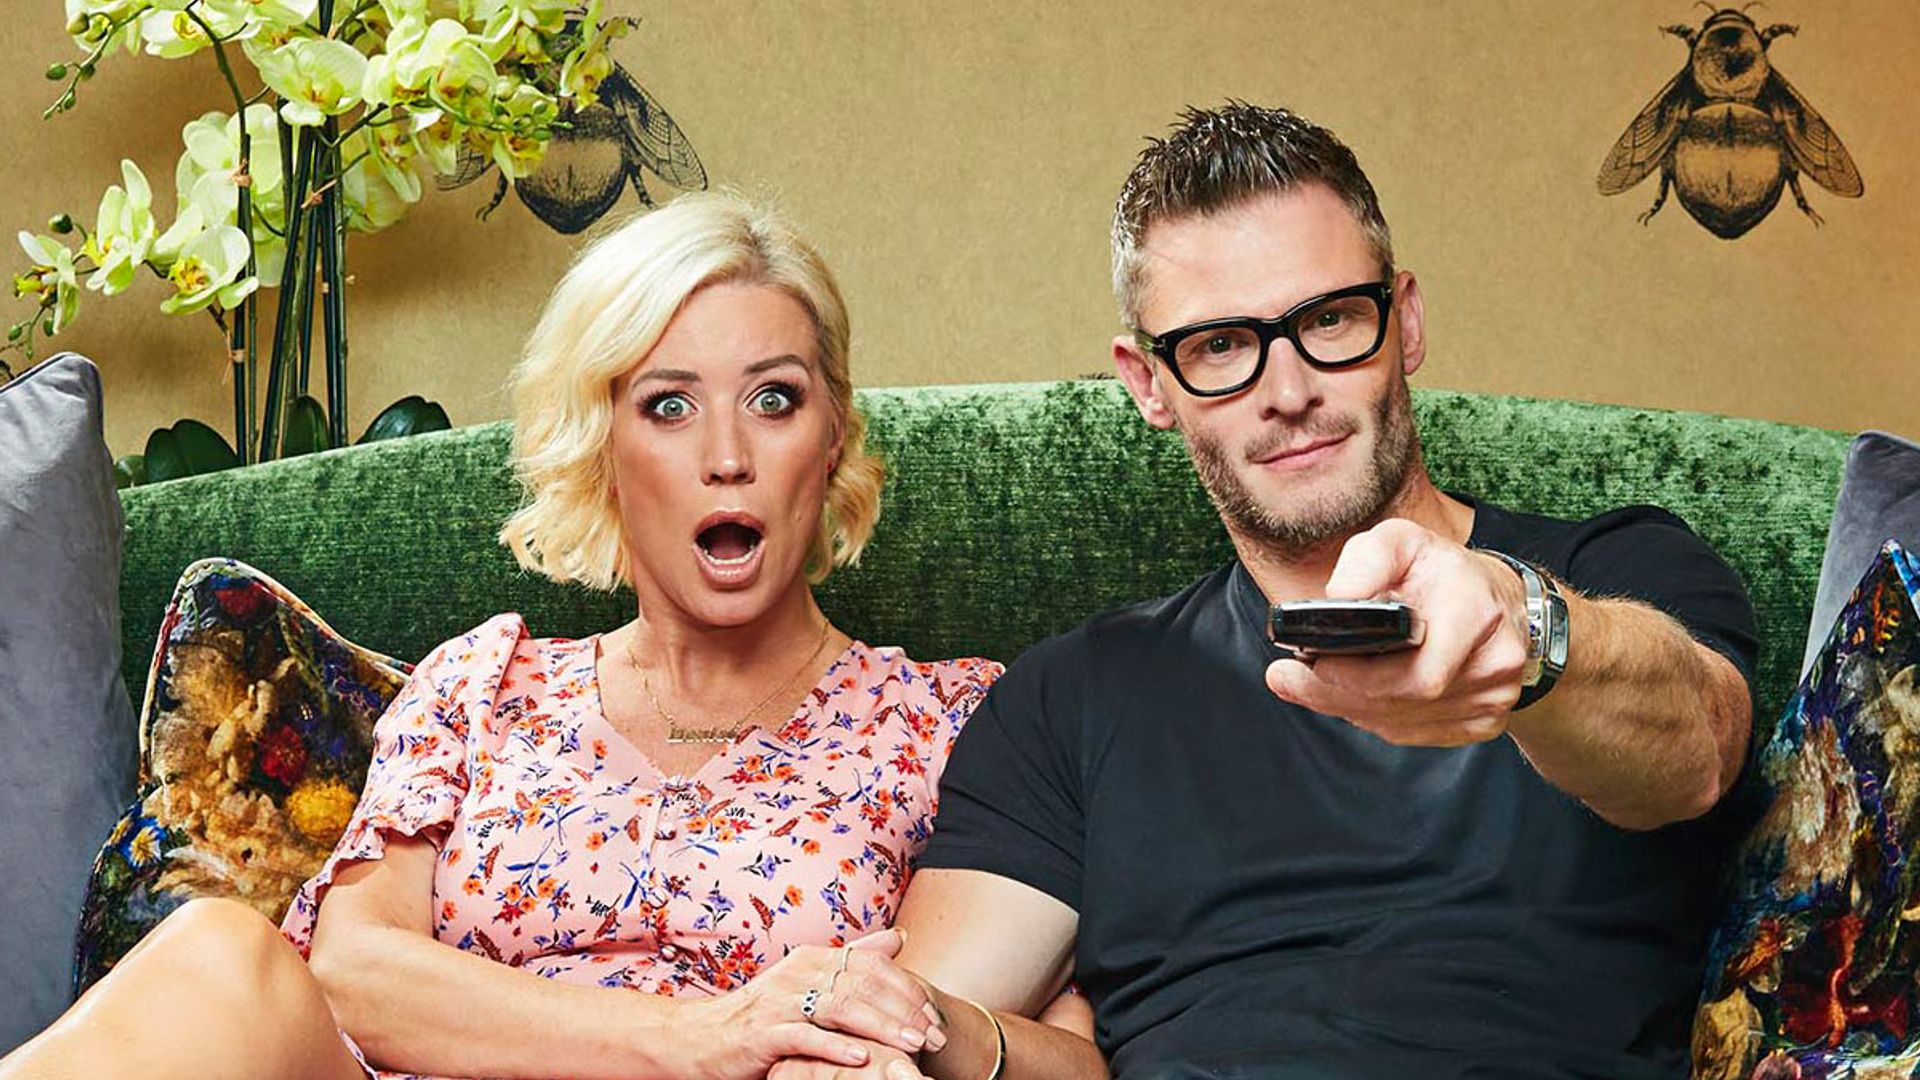 Gogglebox viewers left disappointed by latest episode - find out why